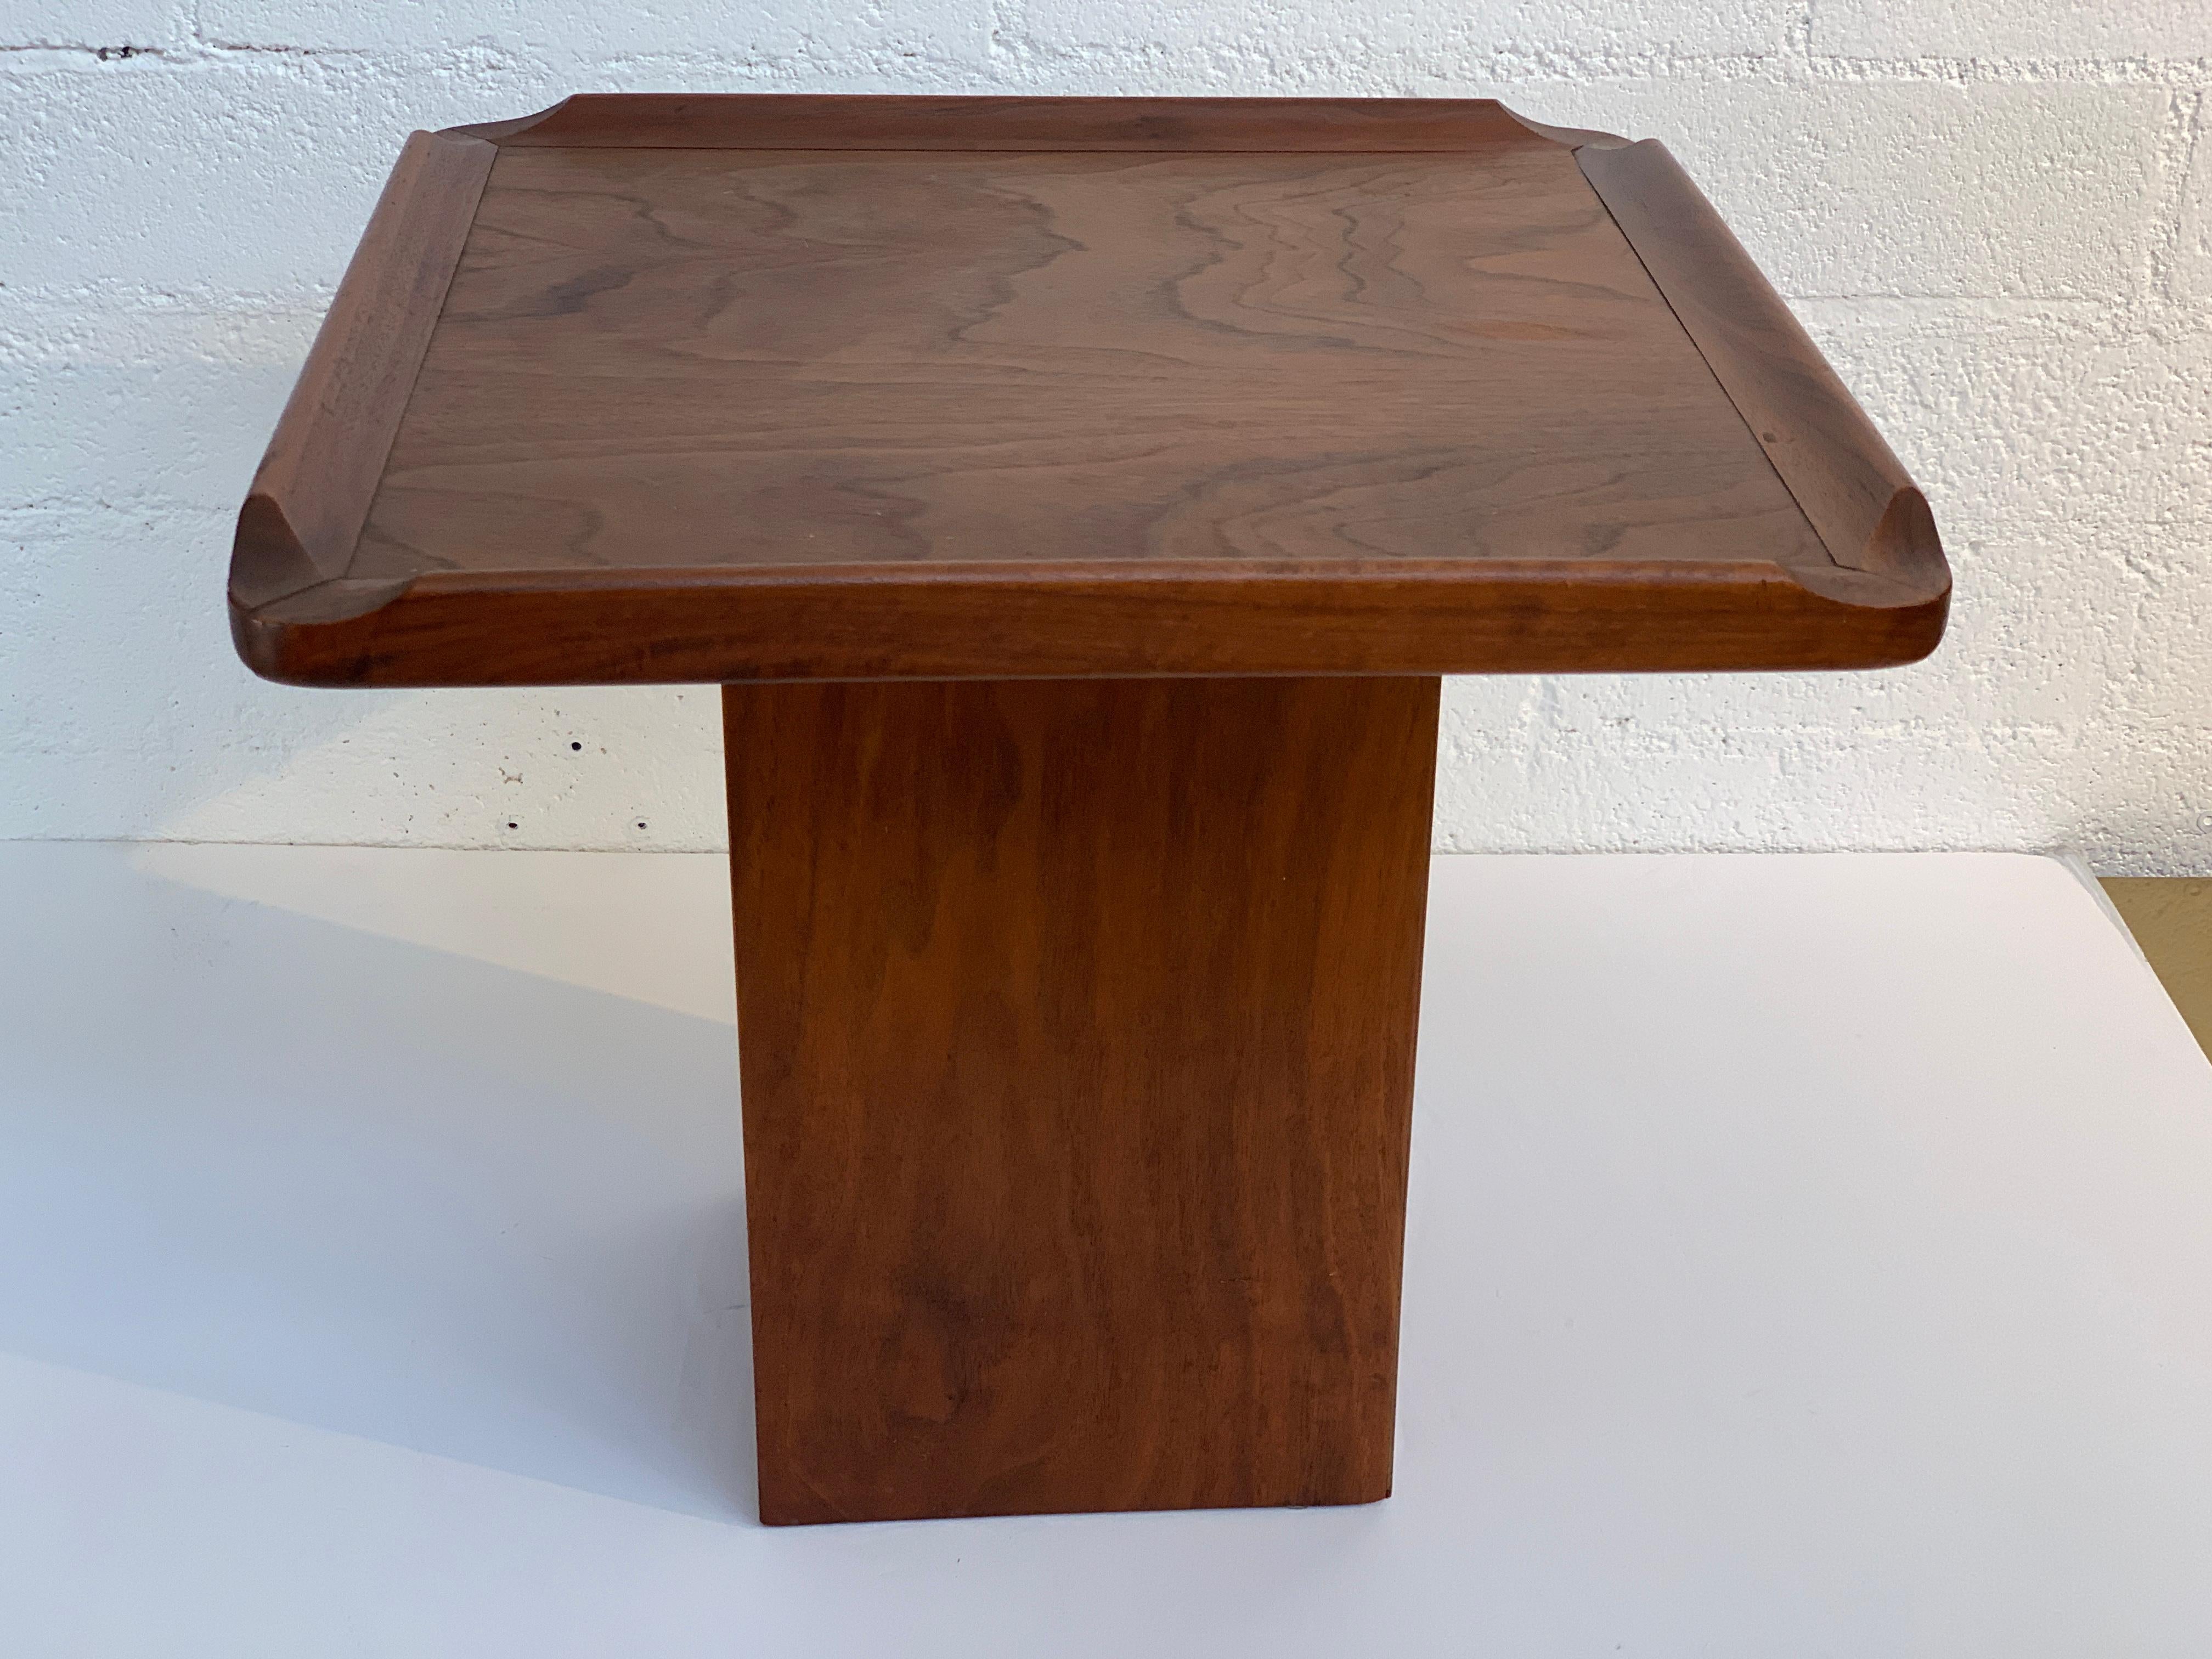 A small table in walnut veneer by Brown Saltman. Still retains the label underneath. Original condition with age appropriate wear and imperfections.